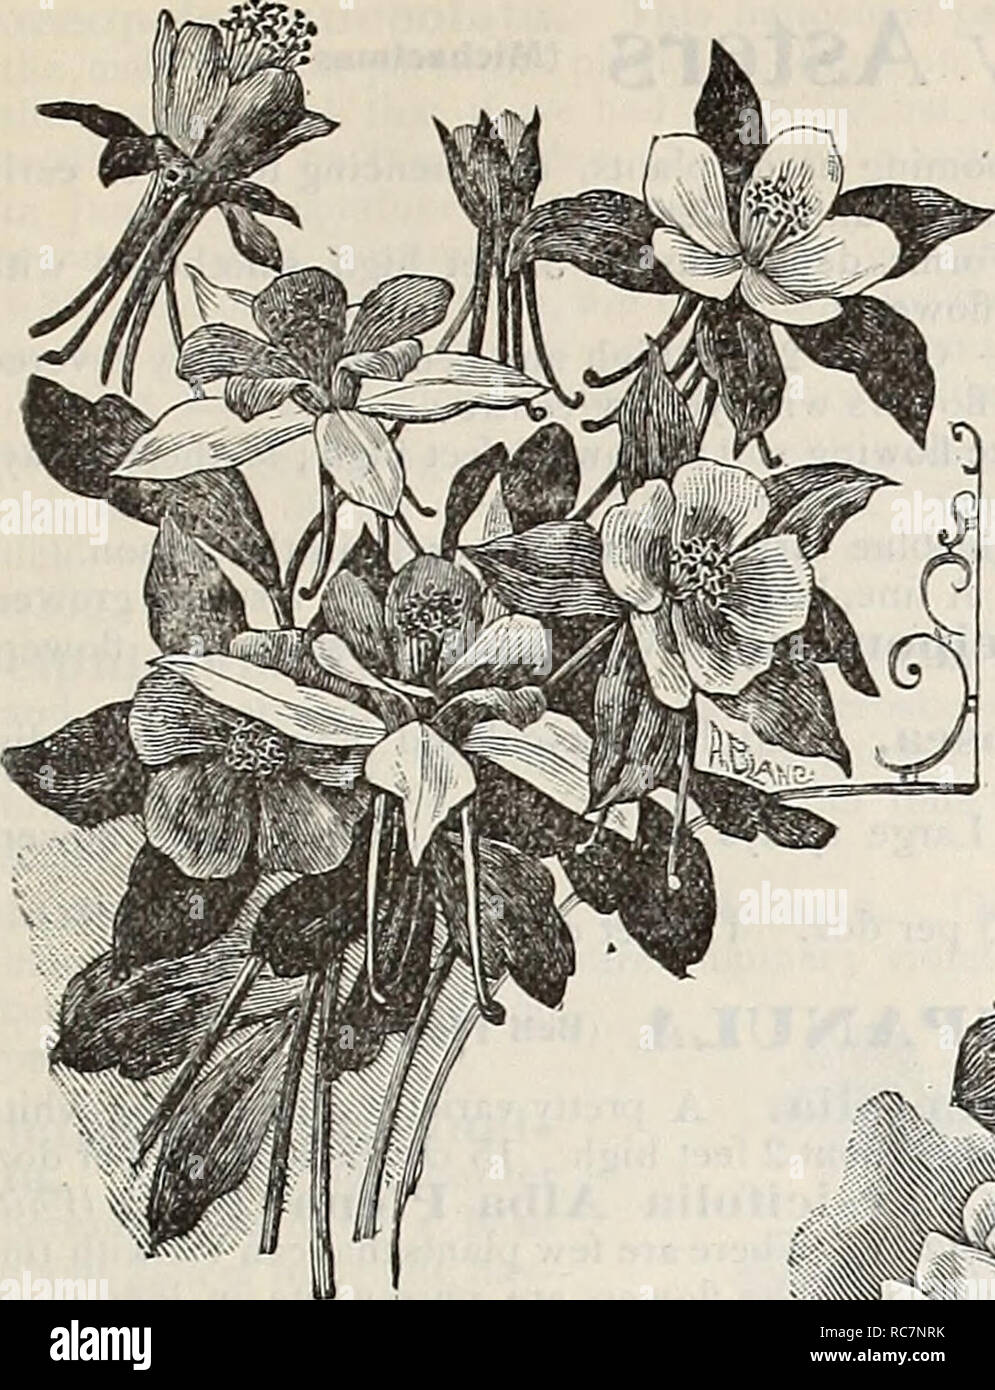 . Dreer's garden calendar : 1898. Seeds Catalogs; Nursery stock Catalogs; Gardening Catalogs; Flowers Seeds Catalogs; Vegetables Seeds Catalogs. SELECT LIST OF HARDY PERENNIALS.. Aquilegia Glandulosa. ANEMONE JAPONICA. One of the most beautiful of ihe hardy herbaceous plants. They com- mence to open their lich-colored blooms in August, and continue to incrense in beauty until cut by frost. They thrive l)est in a light, rich, moist soil, and should not be transplanted more than is necessary. Alba. Pure white, yellow centre and dark eye. Elegaus. Carmine, yellow centre, dark eye. Liady Ardilaiin Stock Photo